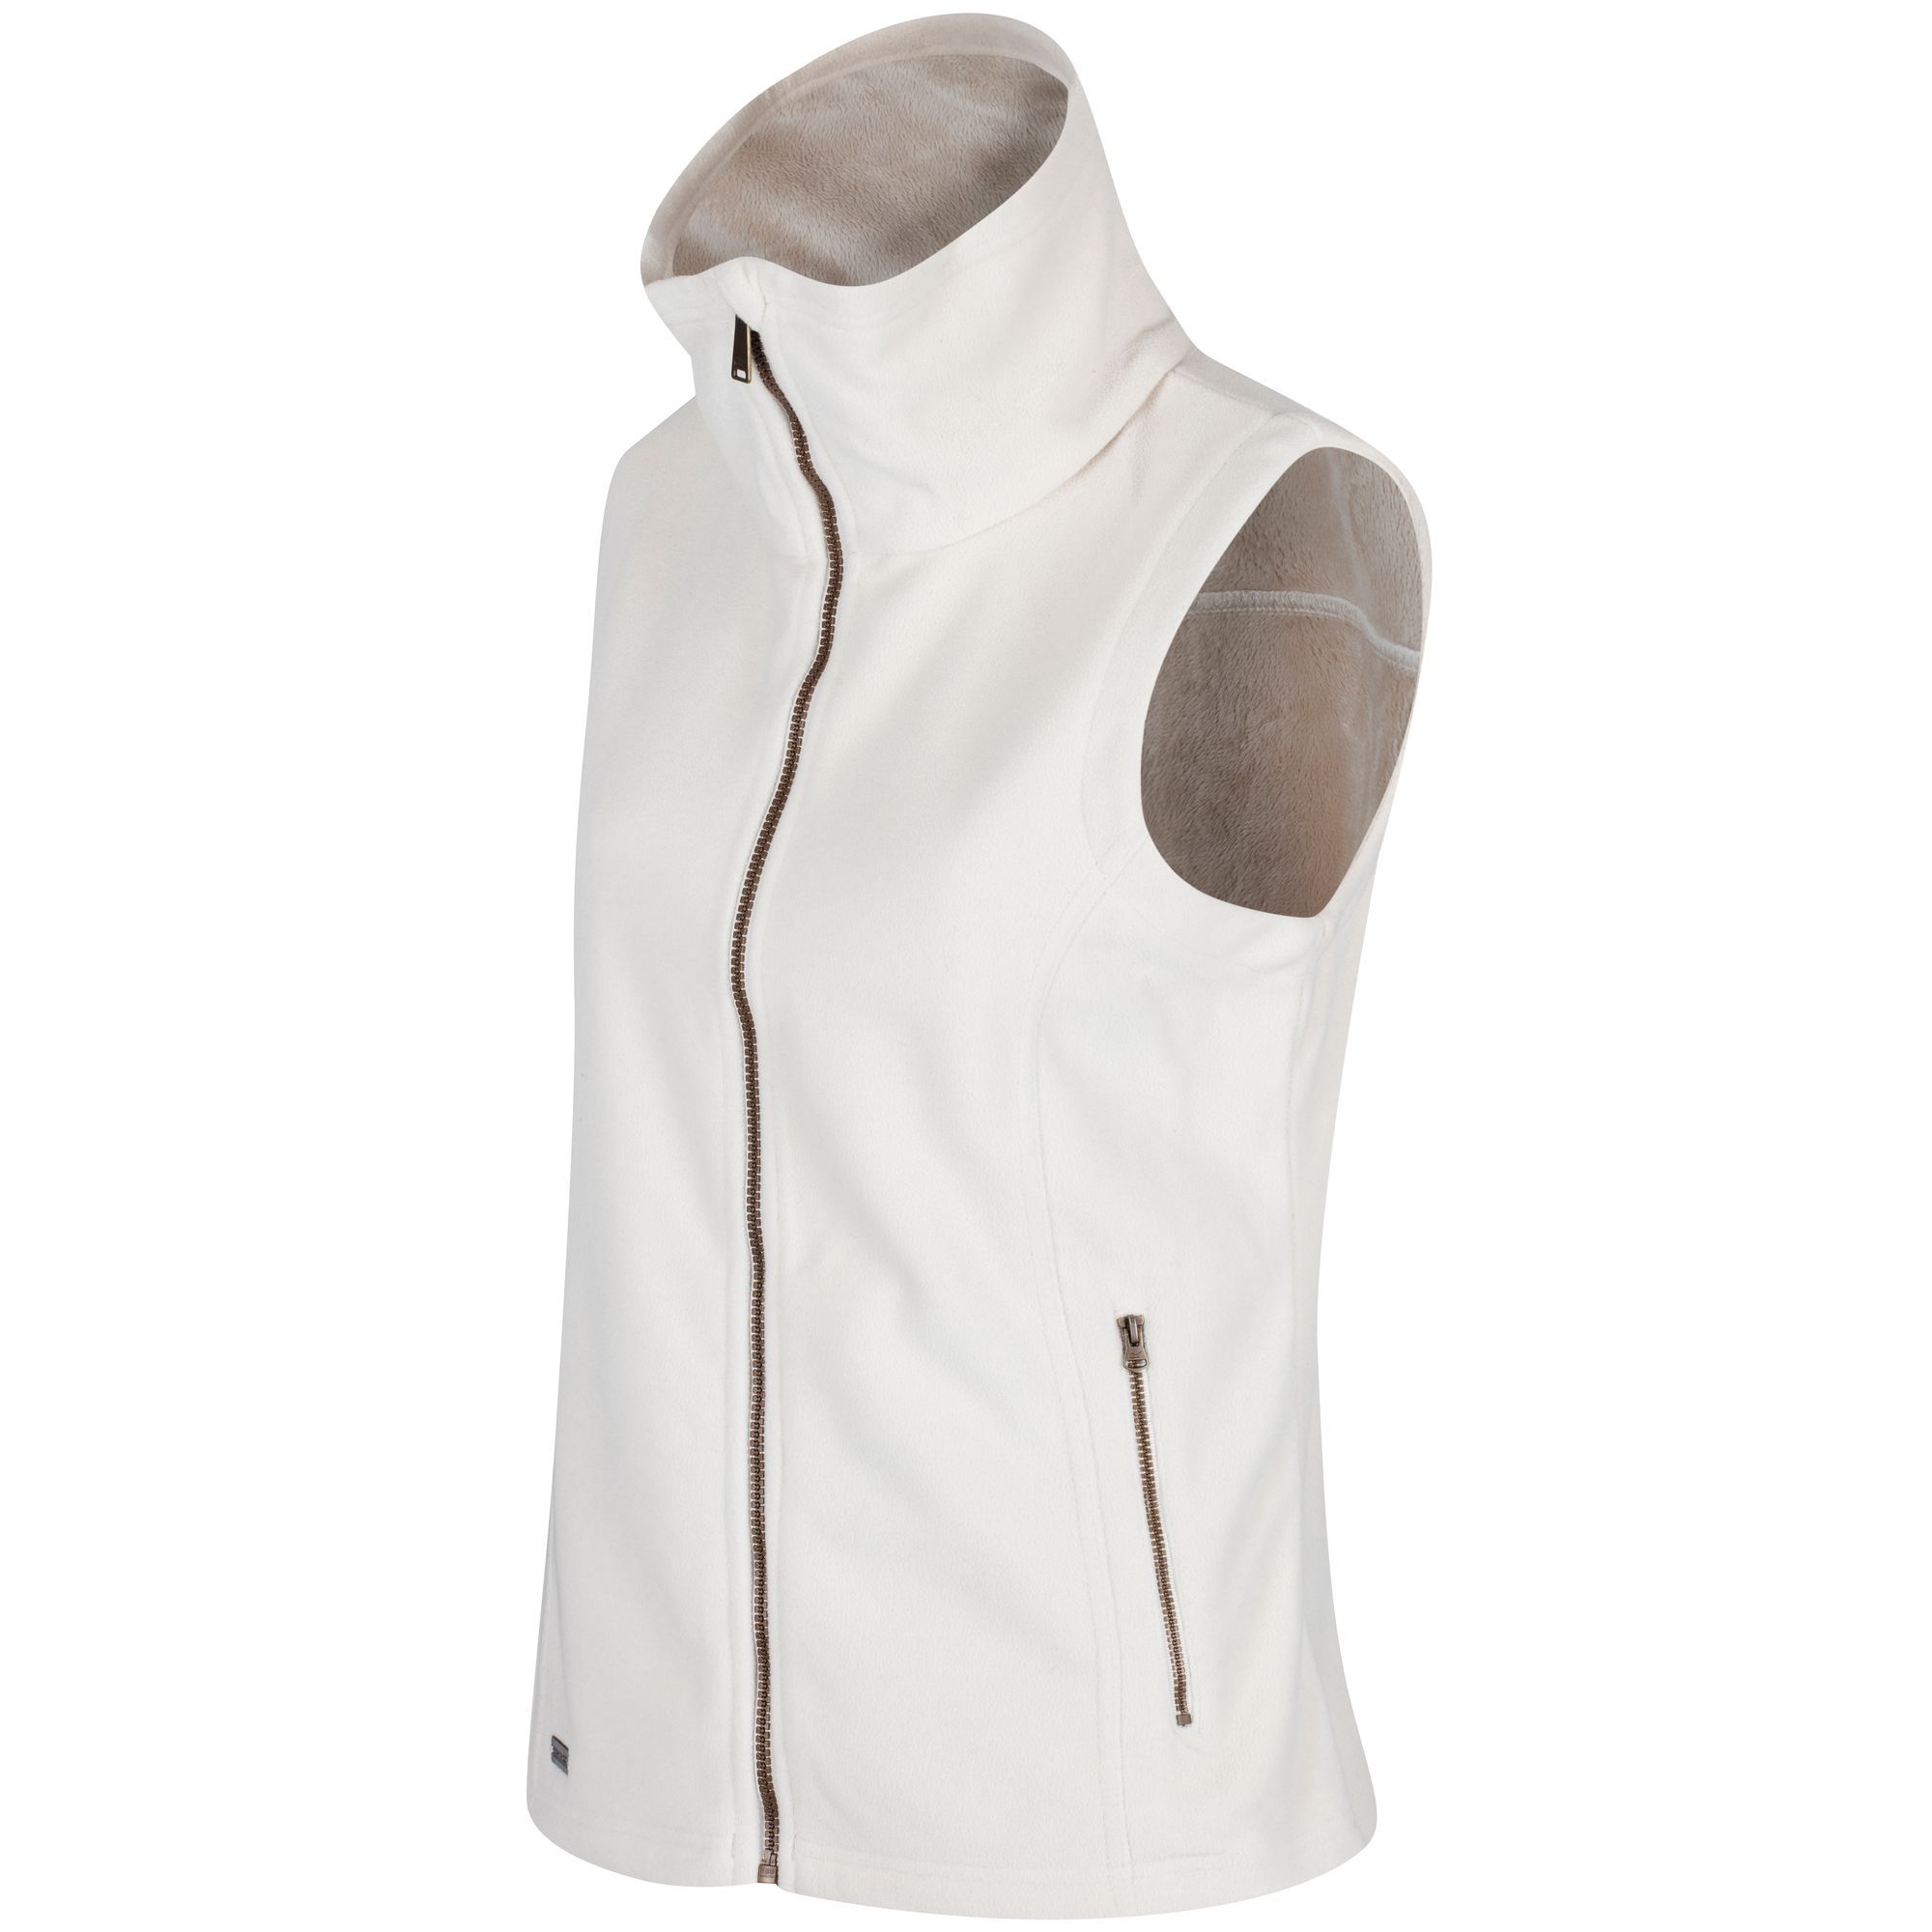 Soft, snug bodywarmer. Uses `silk-touch` winter weight microfleece (380gsm) with a faux-fur inner. High-cut collar drapes beautifully. Regatta Womens sizing (bust approx): 6 (30in/76cm), 8 (32in/81cm), 10 (34in/86cm), 12 (36in/92cm), 14 (38in/97cm), 16 (40in/102cm), 18 (43in/109cm), 20 (45in/114cm), 22 (48in/122cm), 24 (50in/127cm), 26 (52in/132cm), 28 (54in/137cm), 30 (56in/142cm), 32 (58in/147cm), 34 (60in/152cm), 36 (62in/158cm). 100% polyester.